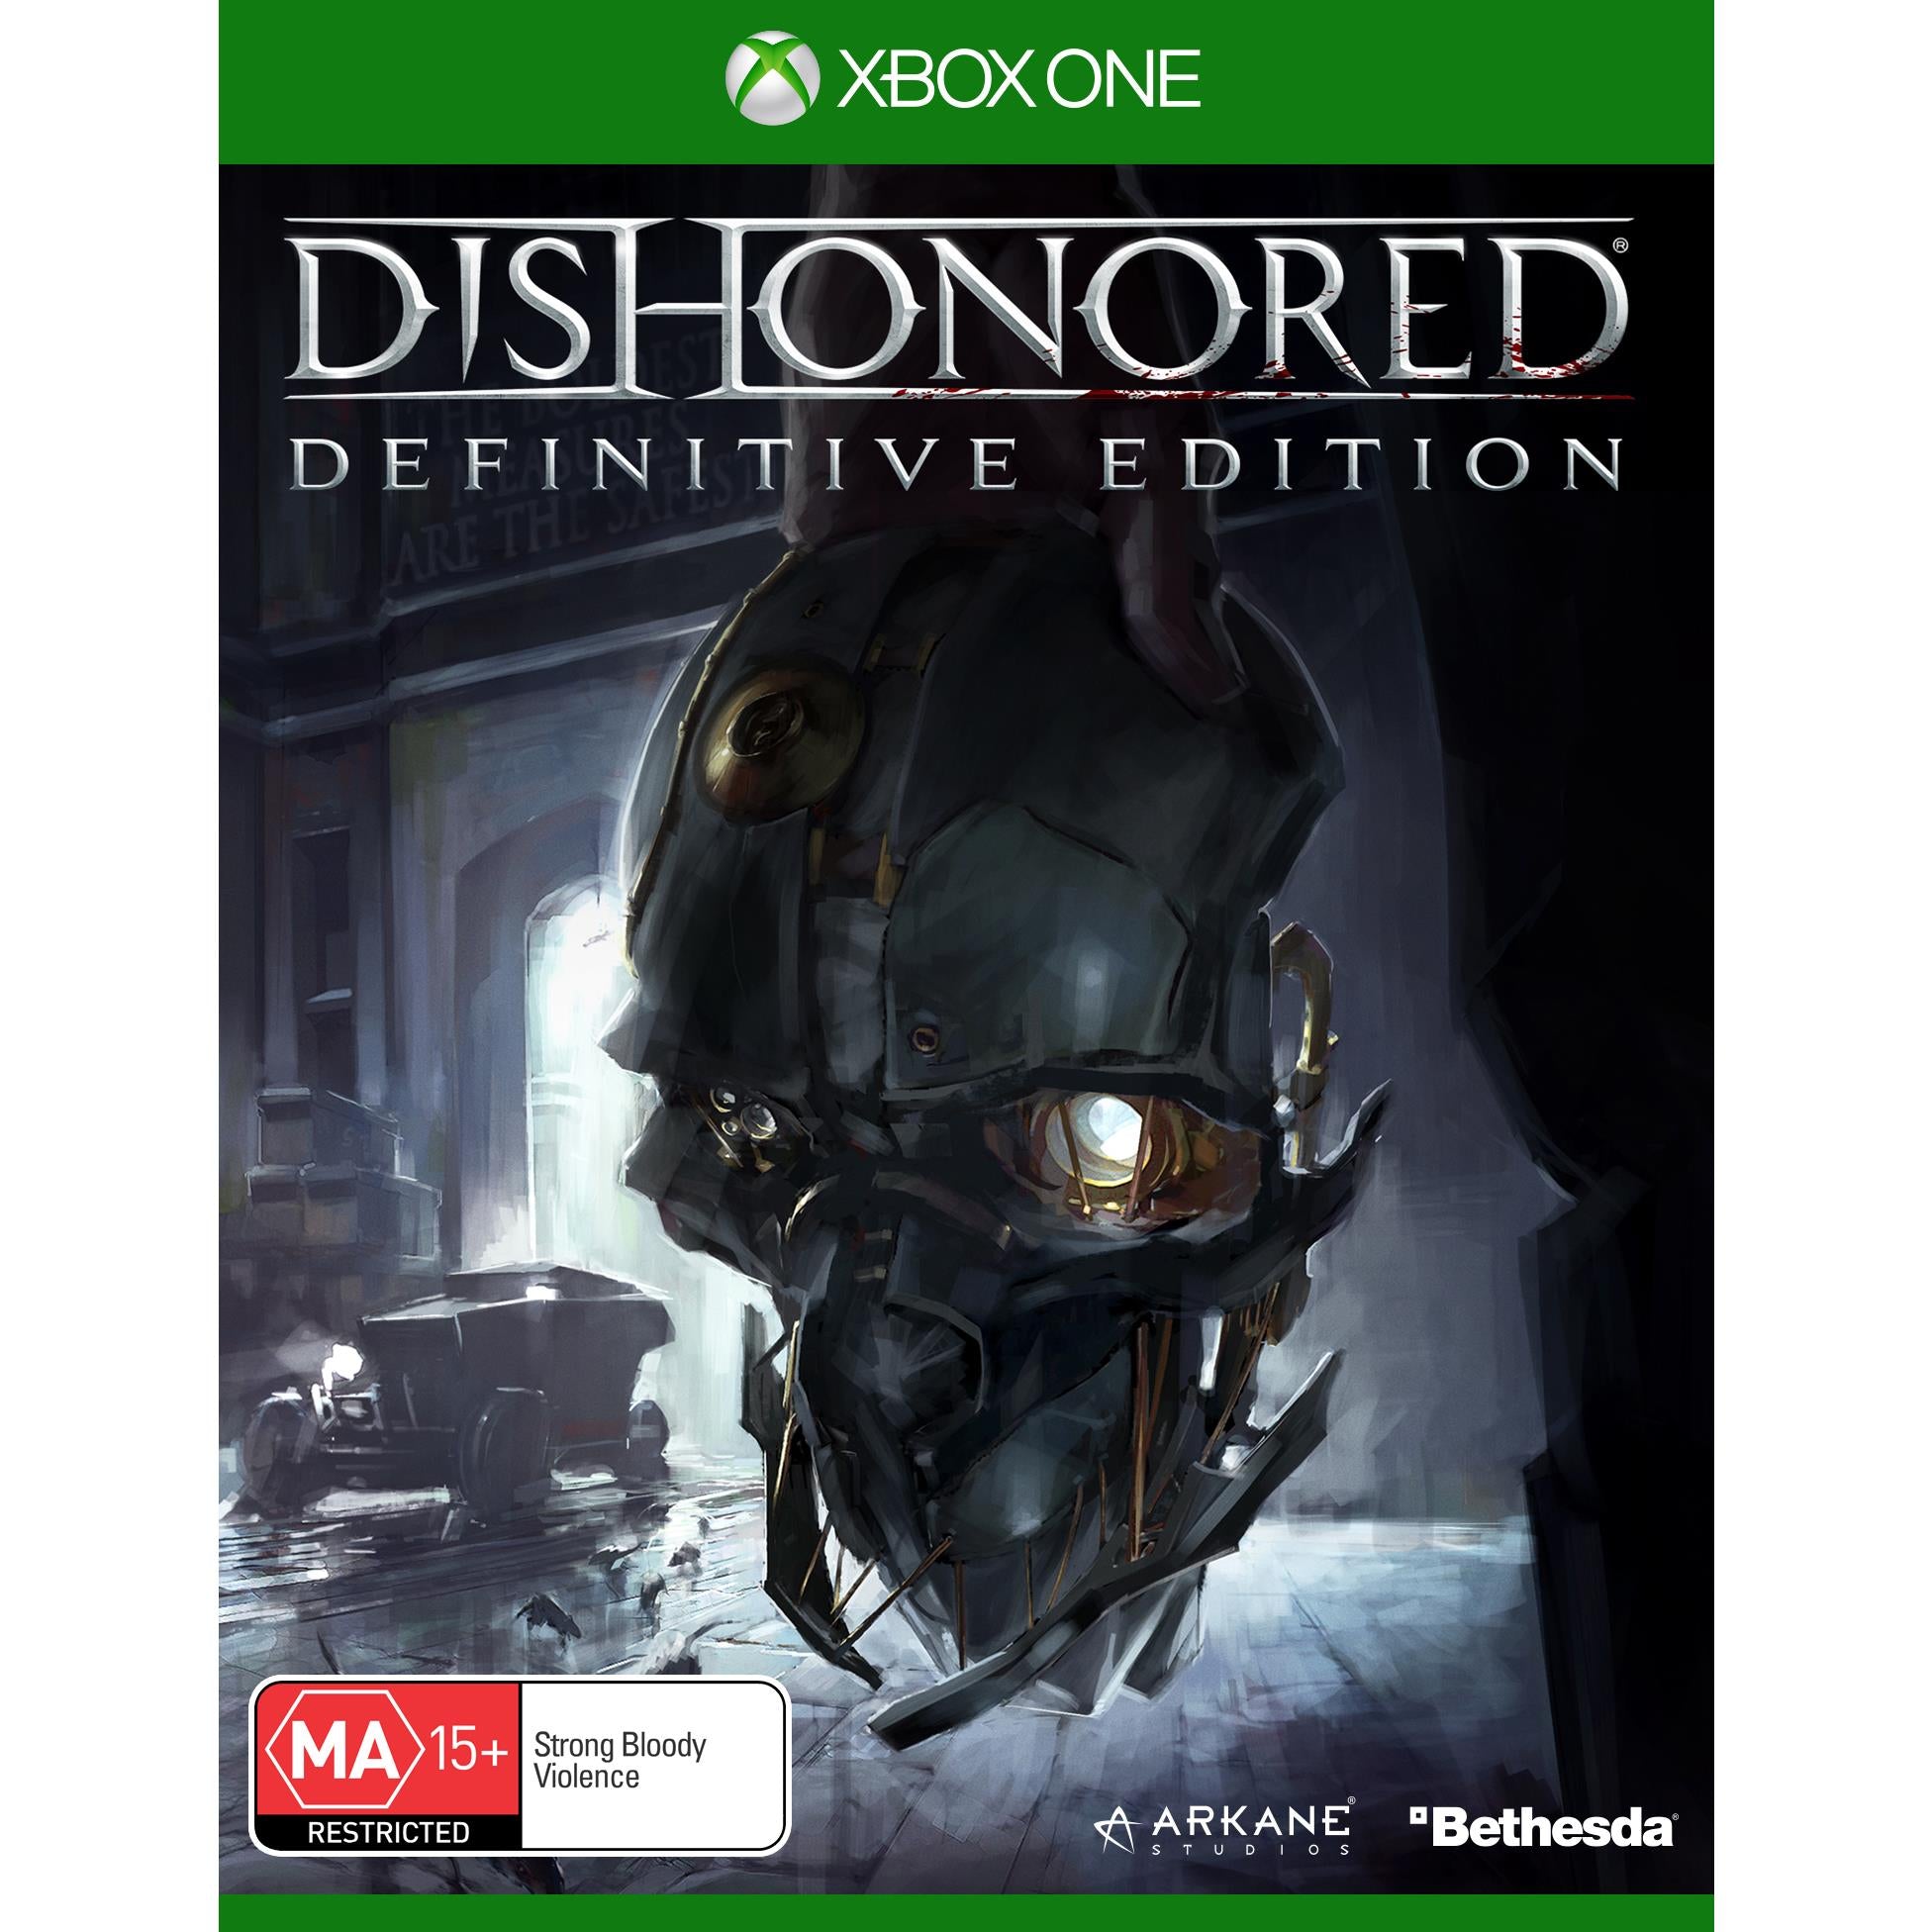 dishonored definitive edition